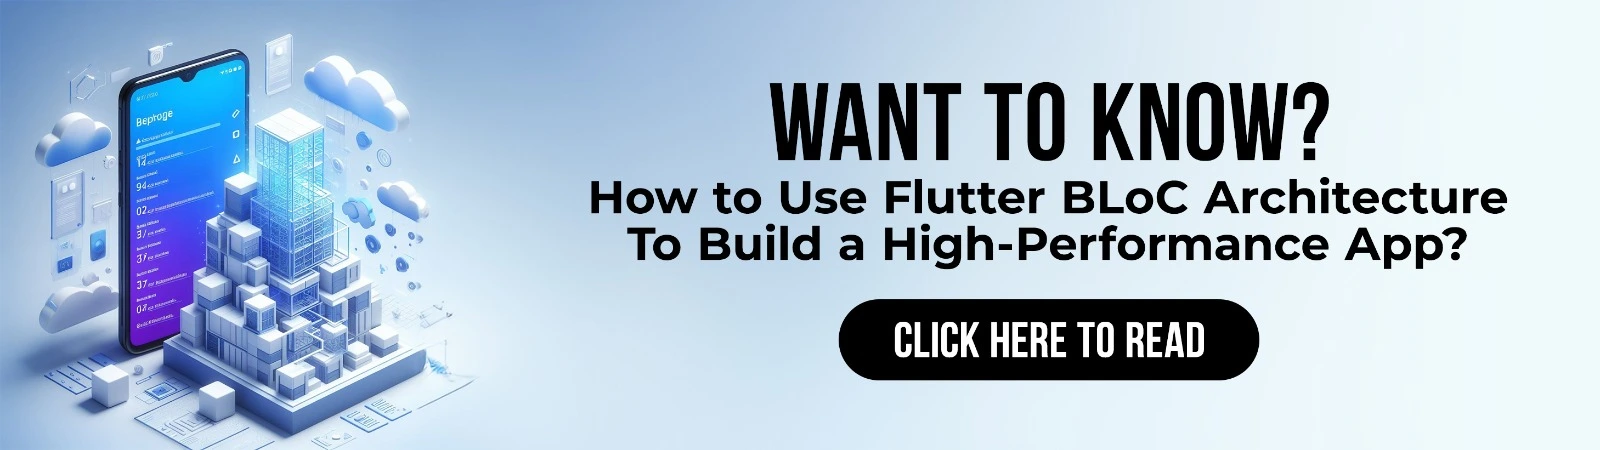 How to Use Flutter BLoC Architecture to Build High-Performance App